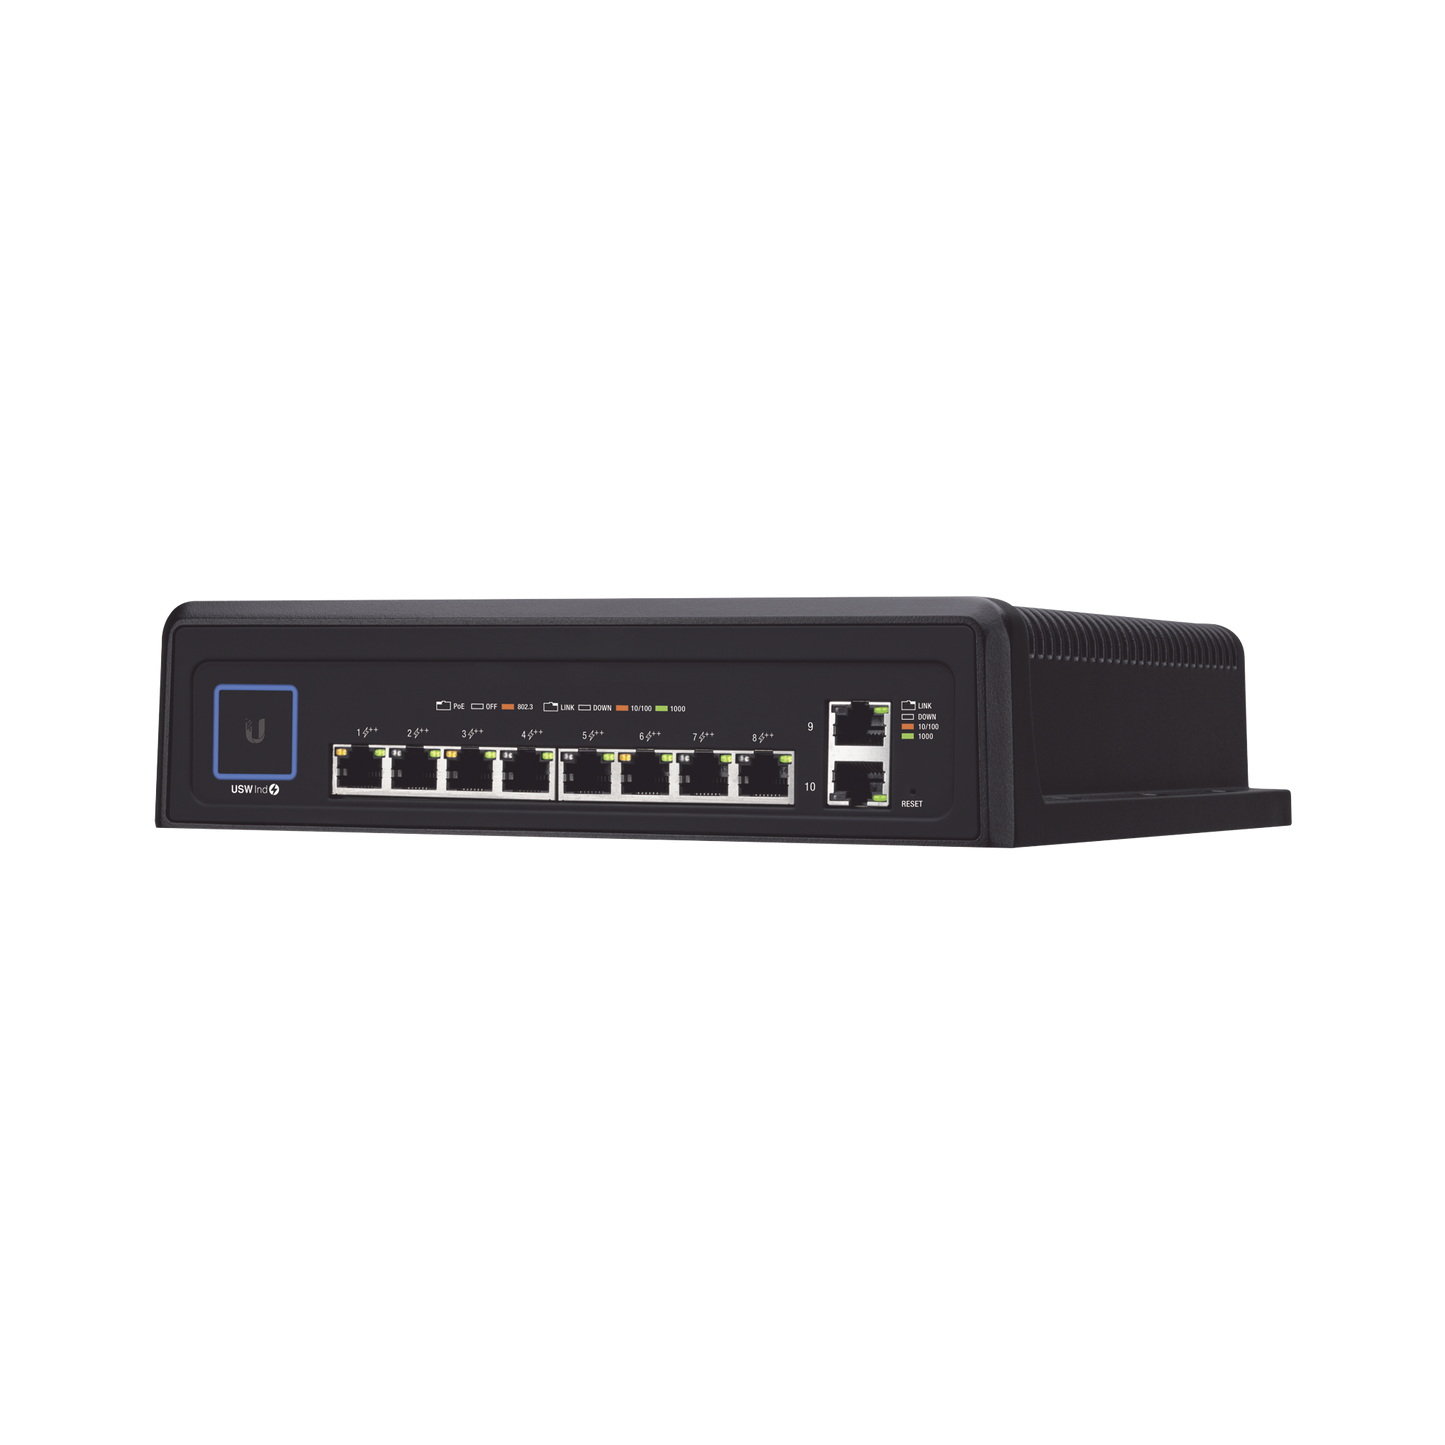 UniFi industrial switch with 10 PoE Gigabit ports (8 x 802.3bt and 2 x Ethernet)